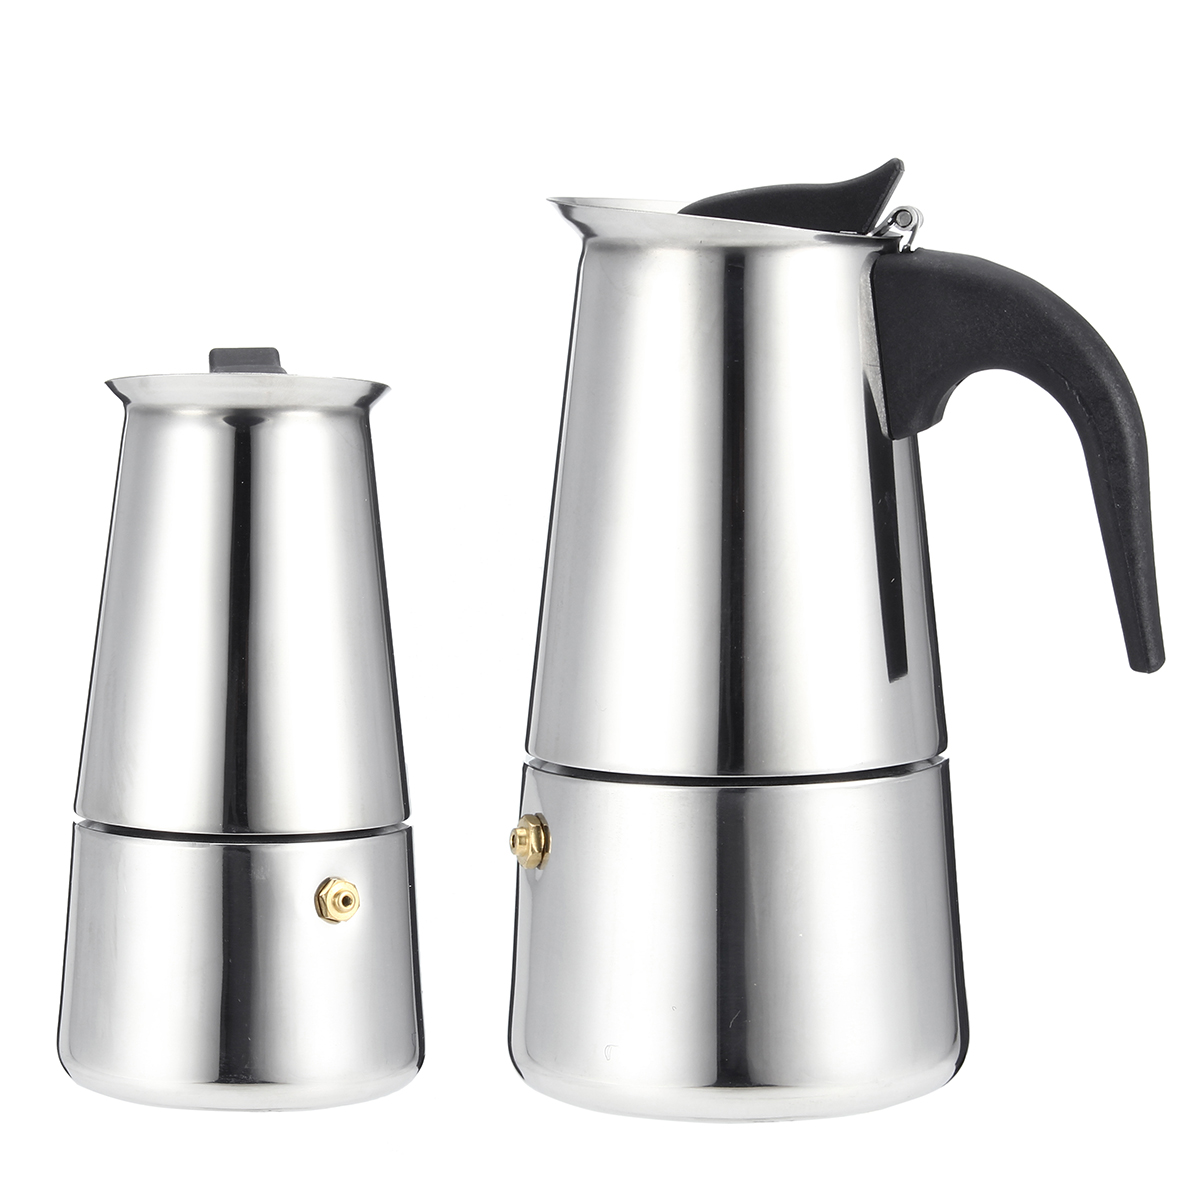 Espresso Moka Coffee Maker Pot Percolator Stainless Steel Electric Stove Electric Coffee Kettle 35